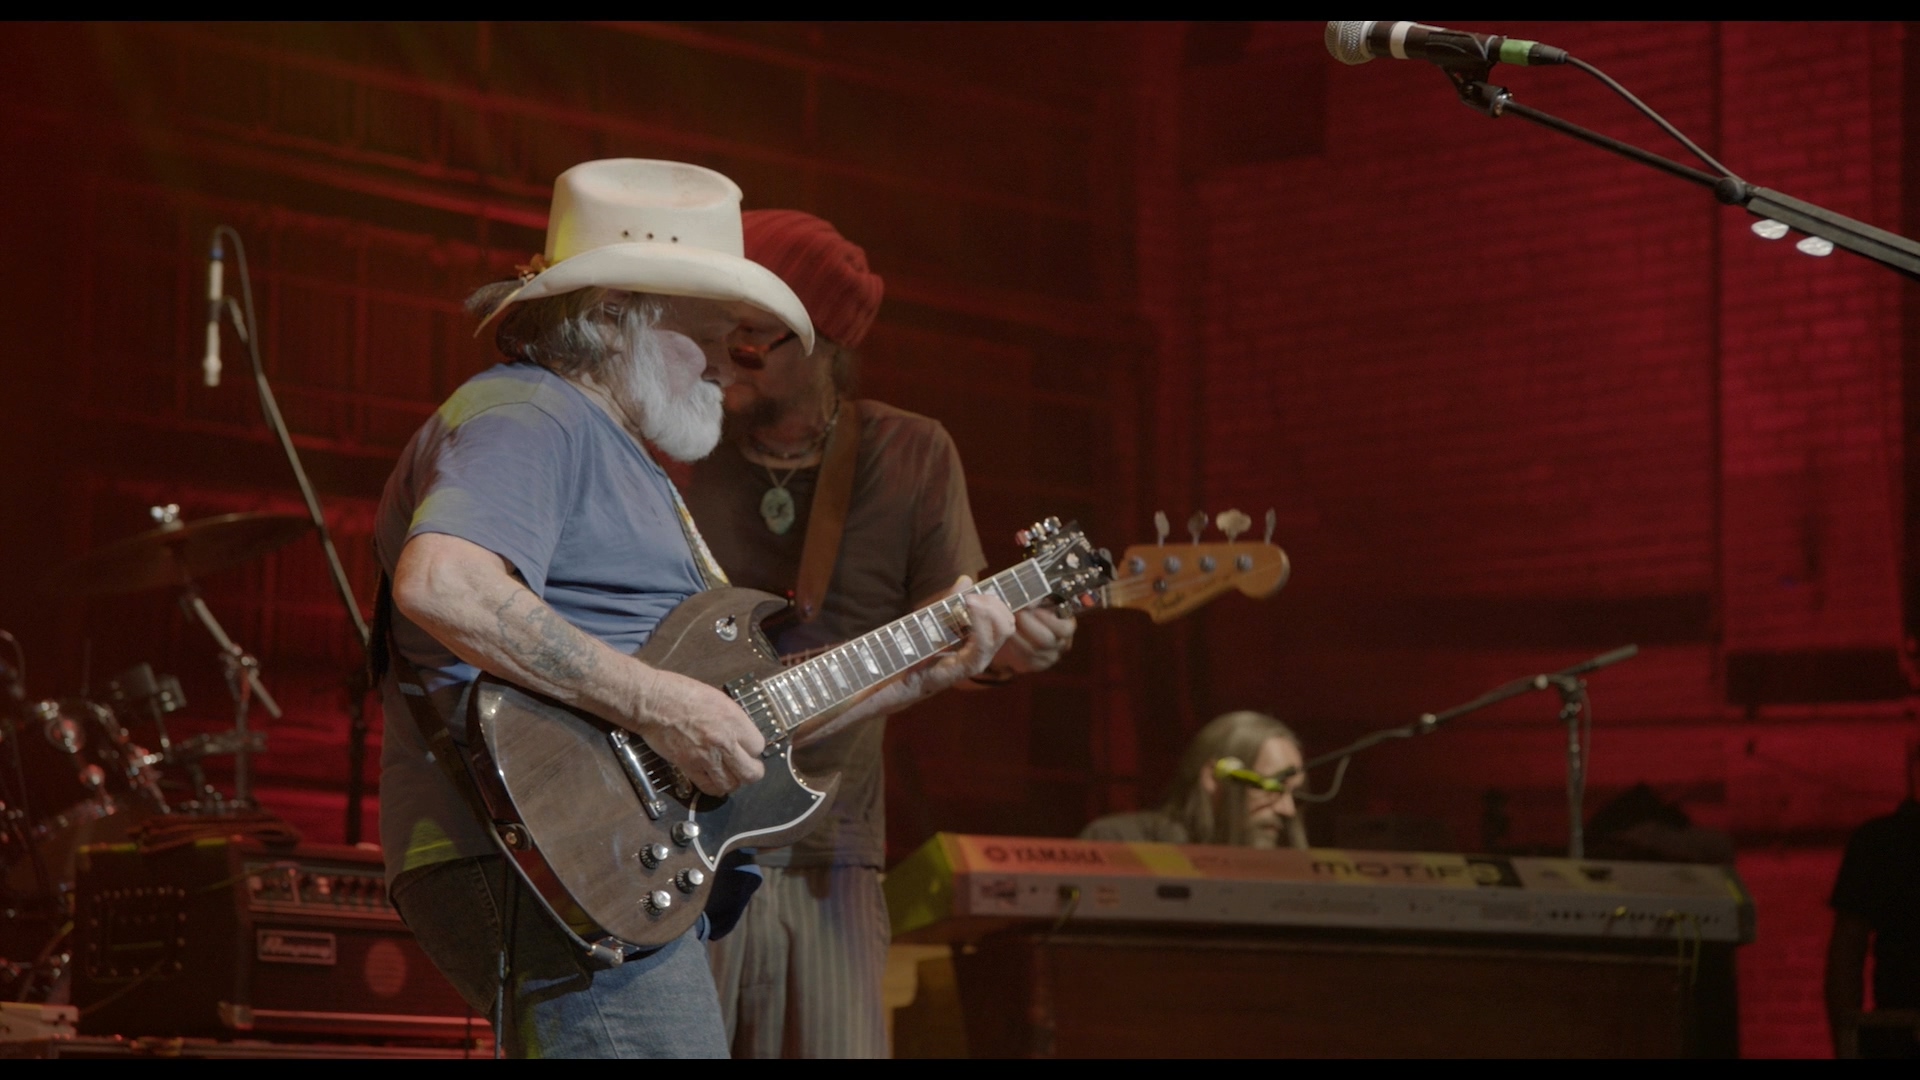 The Dickey Betts Band - Ramblin' Man - Live At The St. George Theatre BD (2019)_20190811_110709.090.jpg